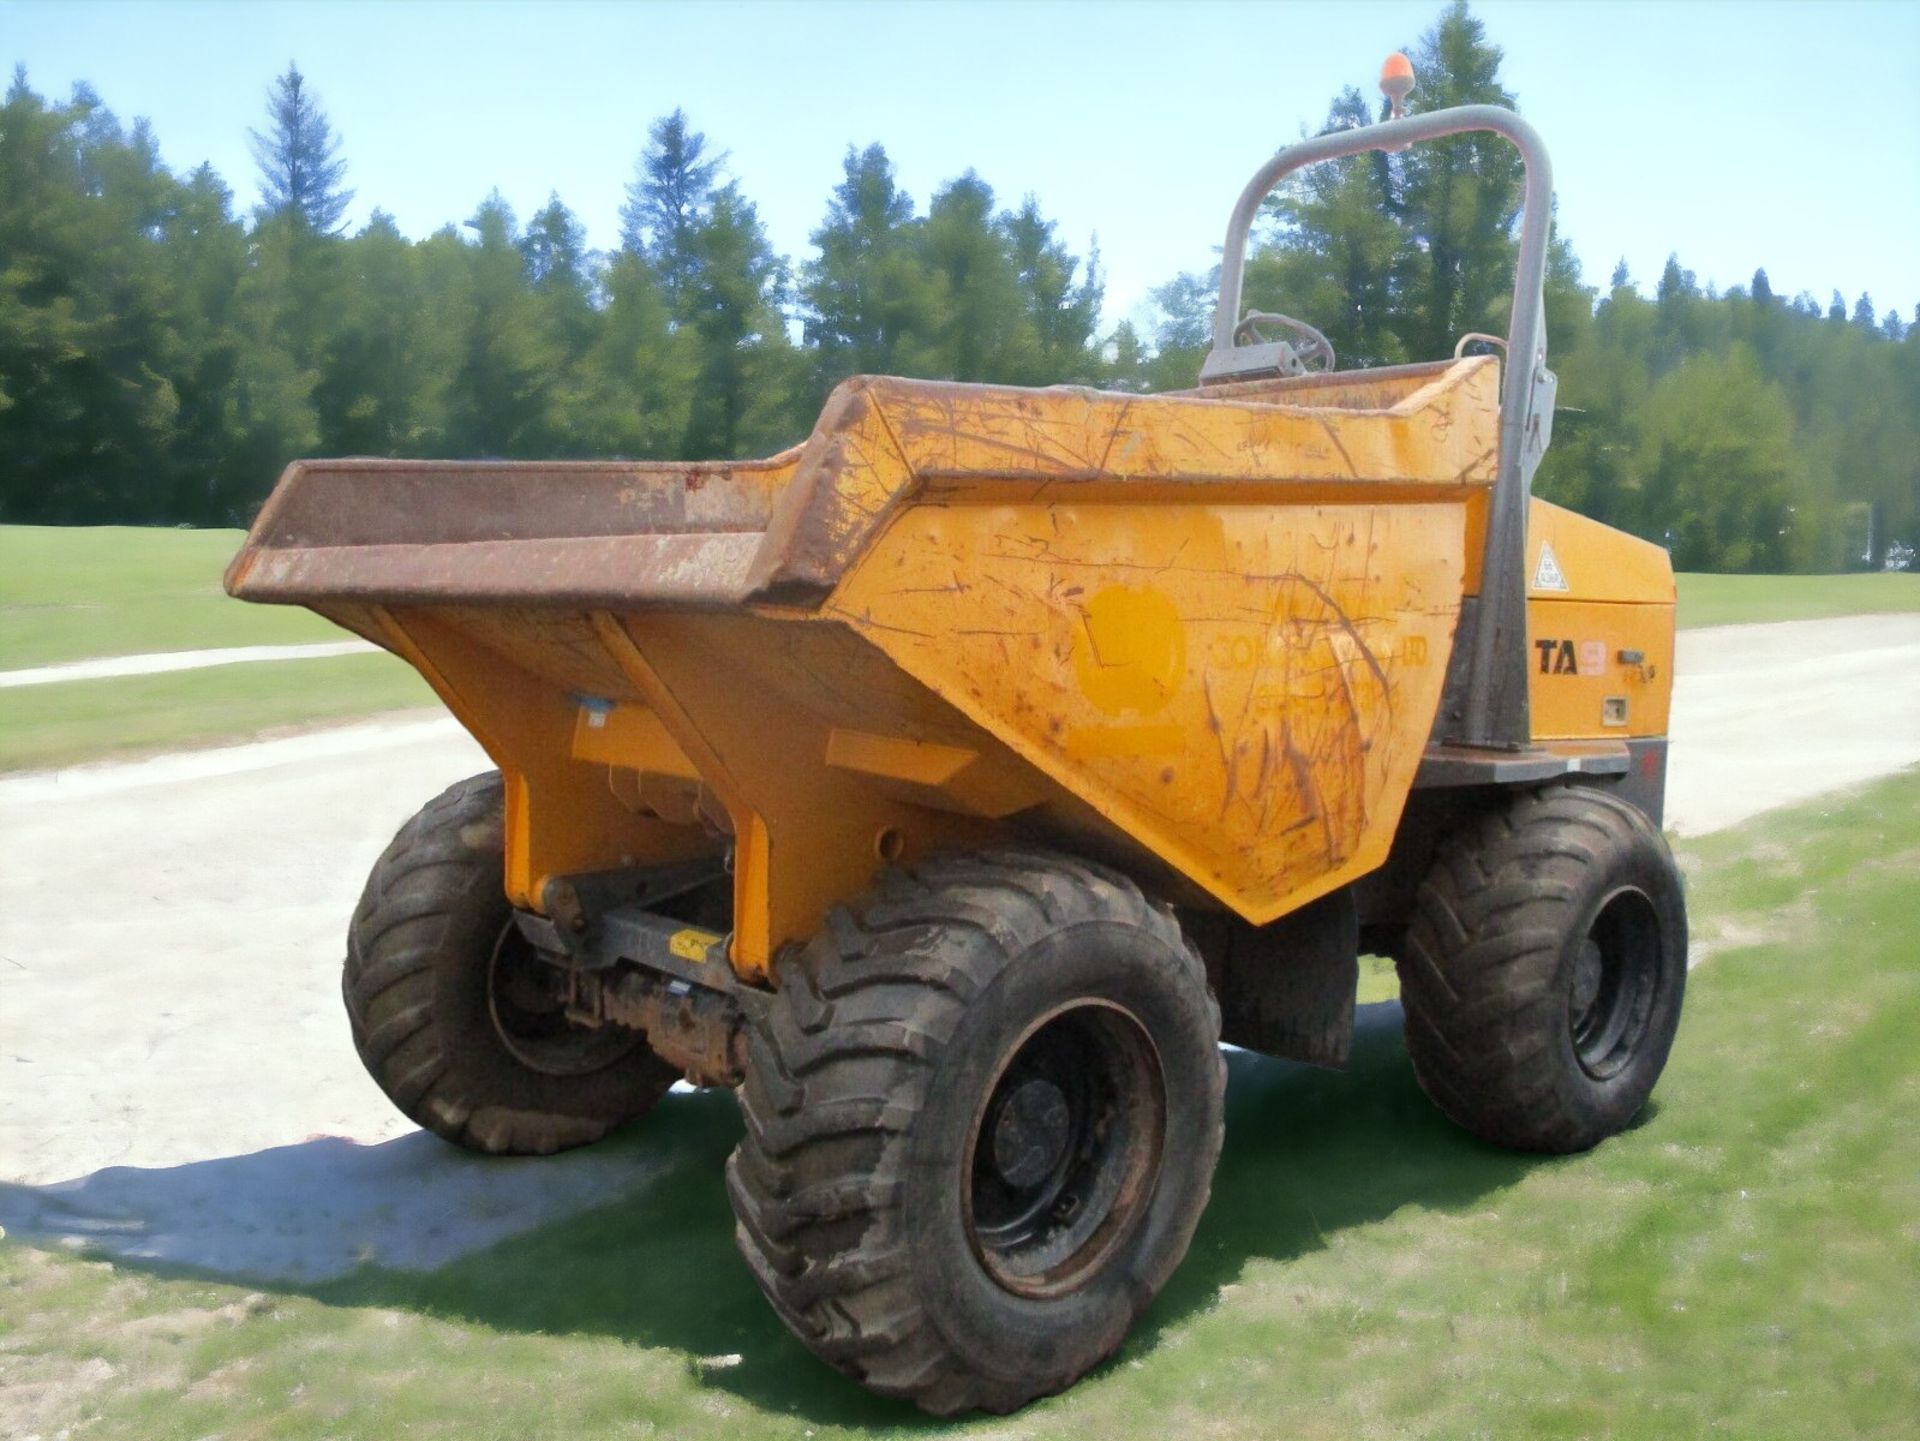 2014 TEREX TA9 9-TON DUMPER - POWER, PERFORMANCE, AND RELIABILITY! - Image 6 of 7